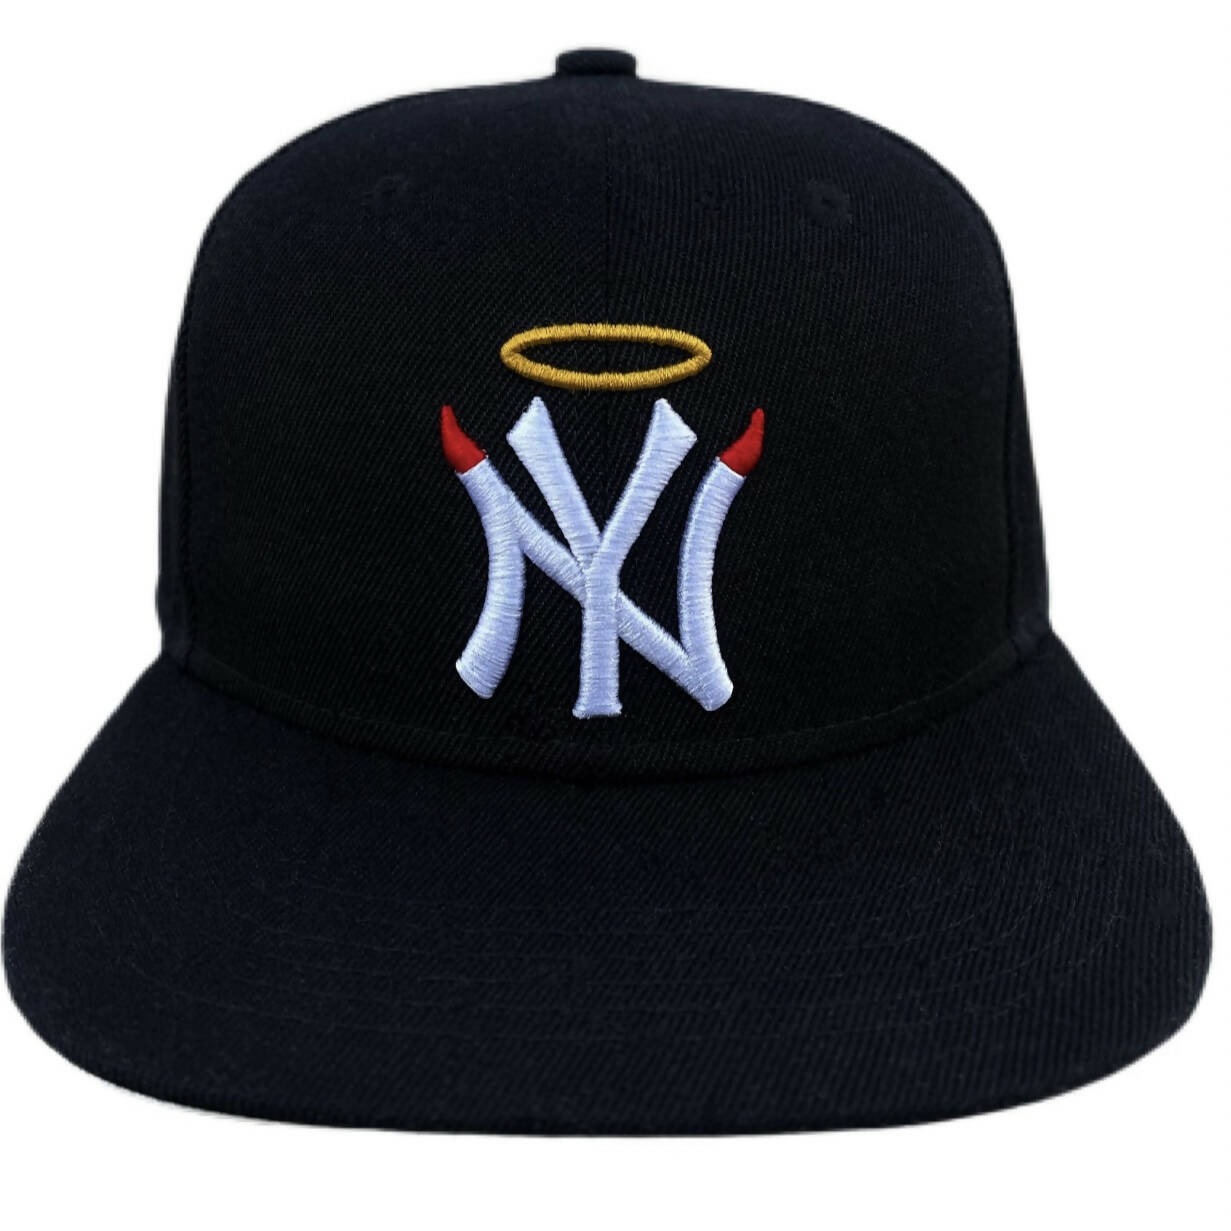 NY WHISPERS FITTED HAT [Large]